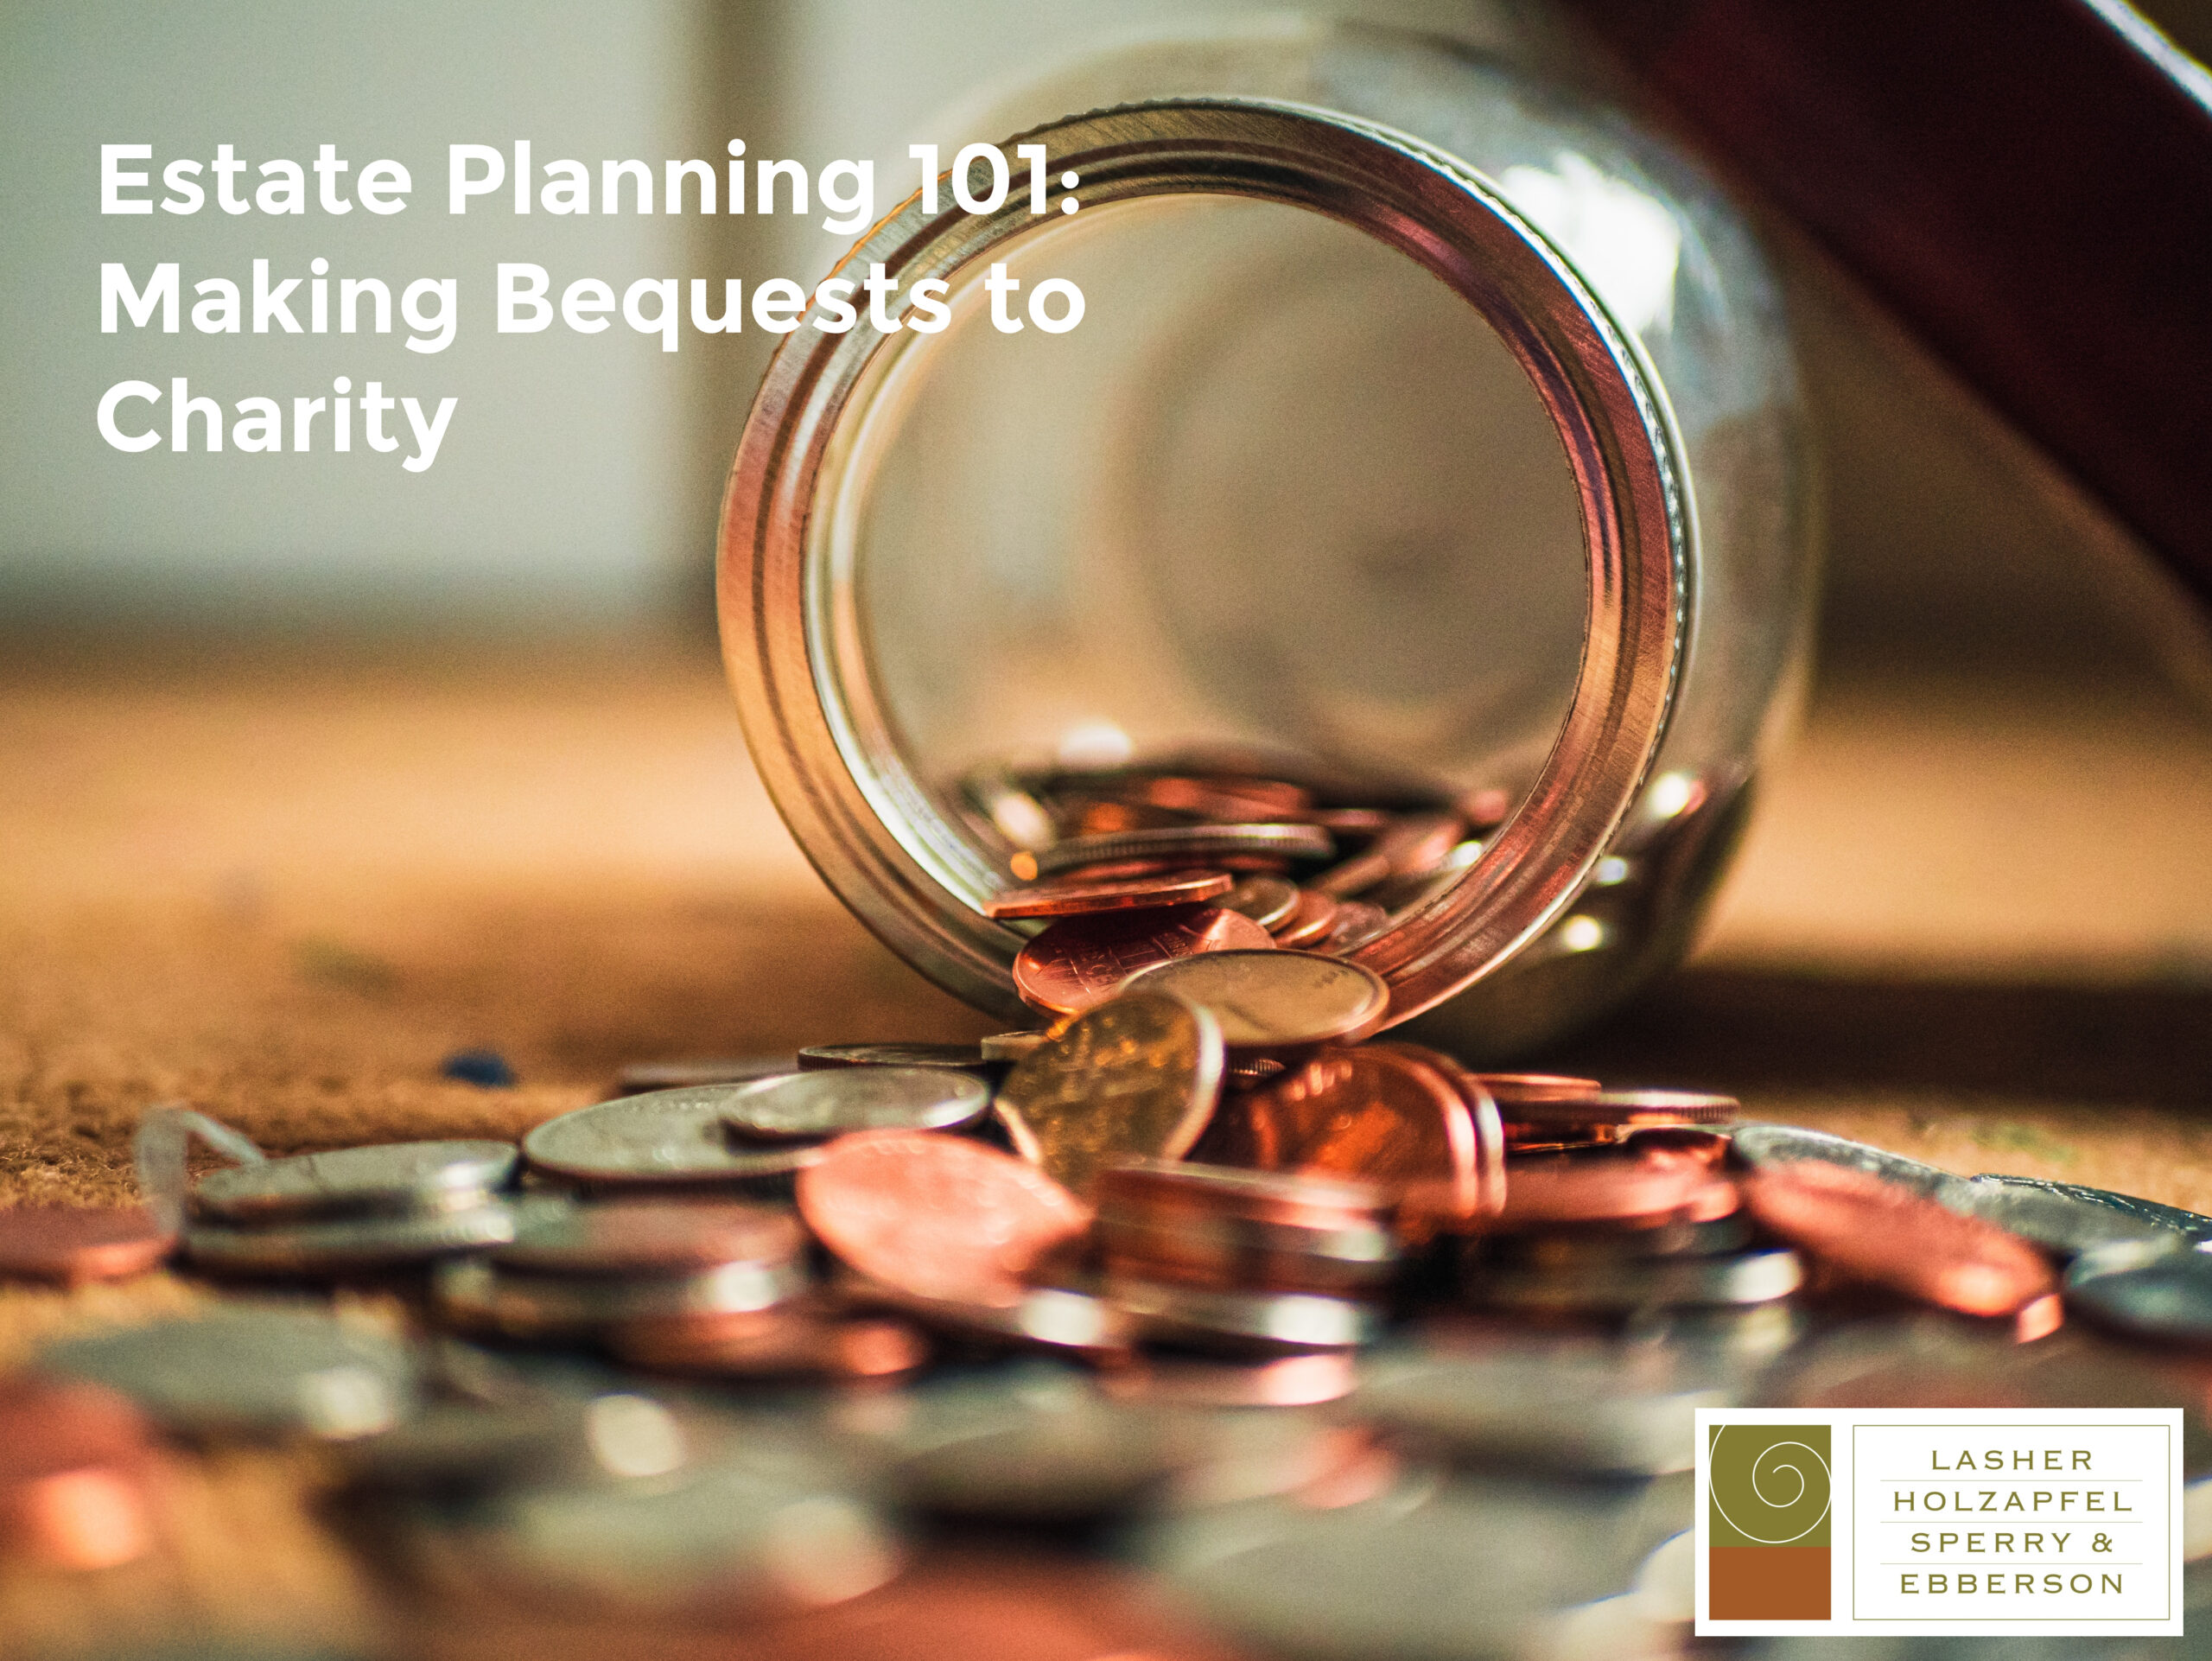 Estate Planning 101: Making Bequests to Charity